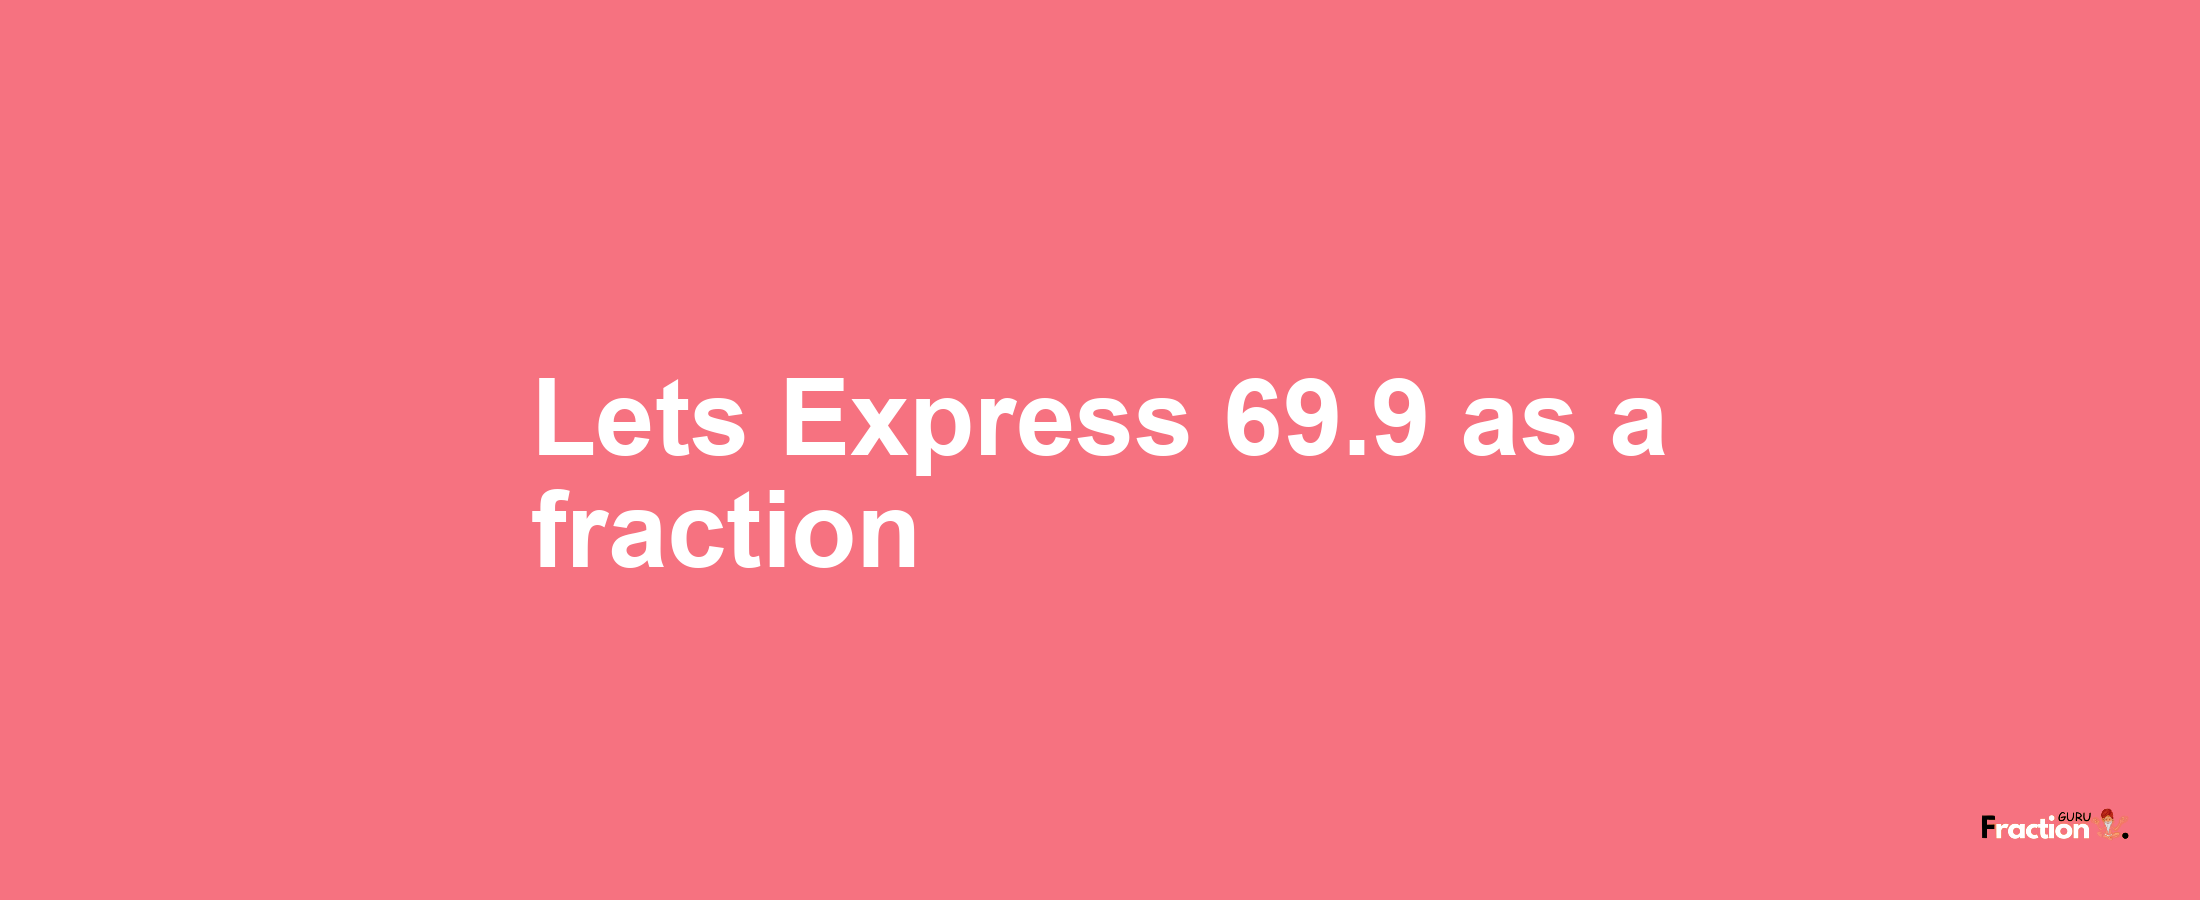 Lets Express 69.9 as afraction